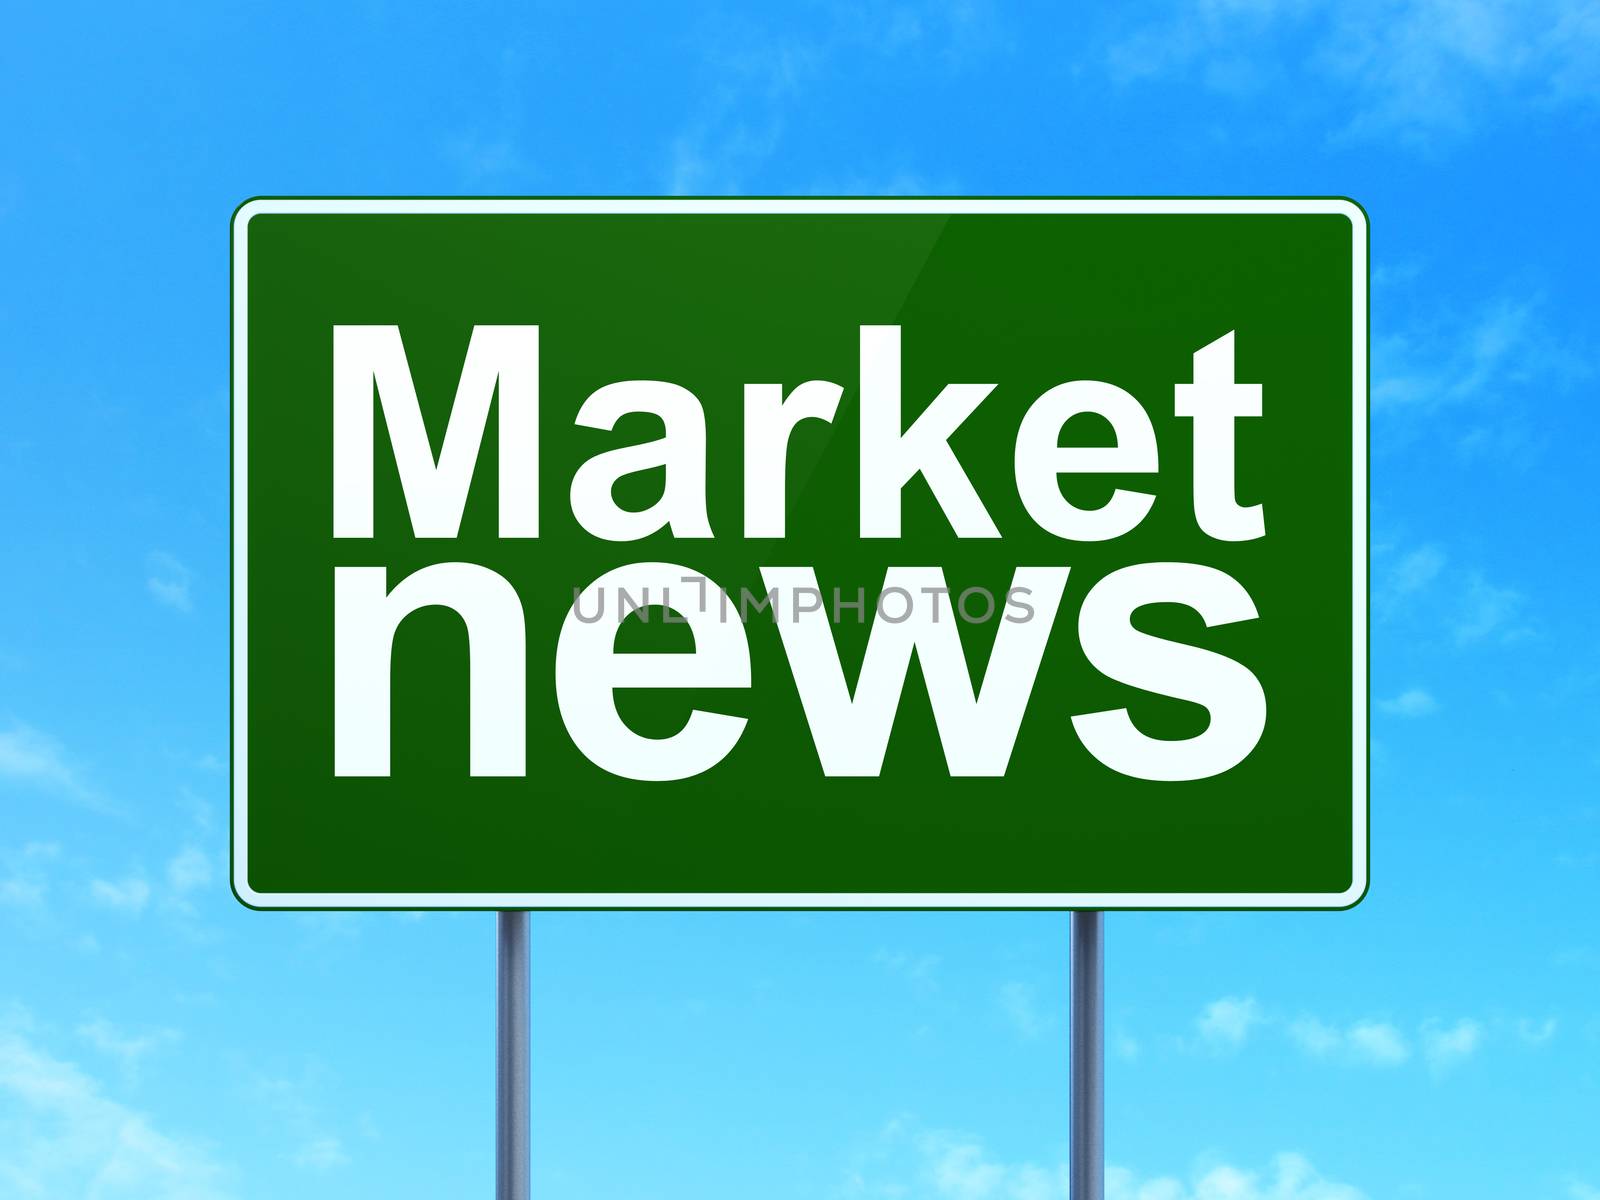 News concept: Market News on green road highway sign, clear blue sky background, 3D rendering